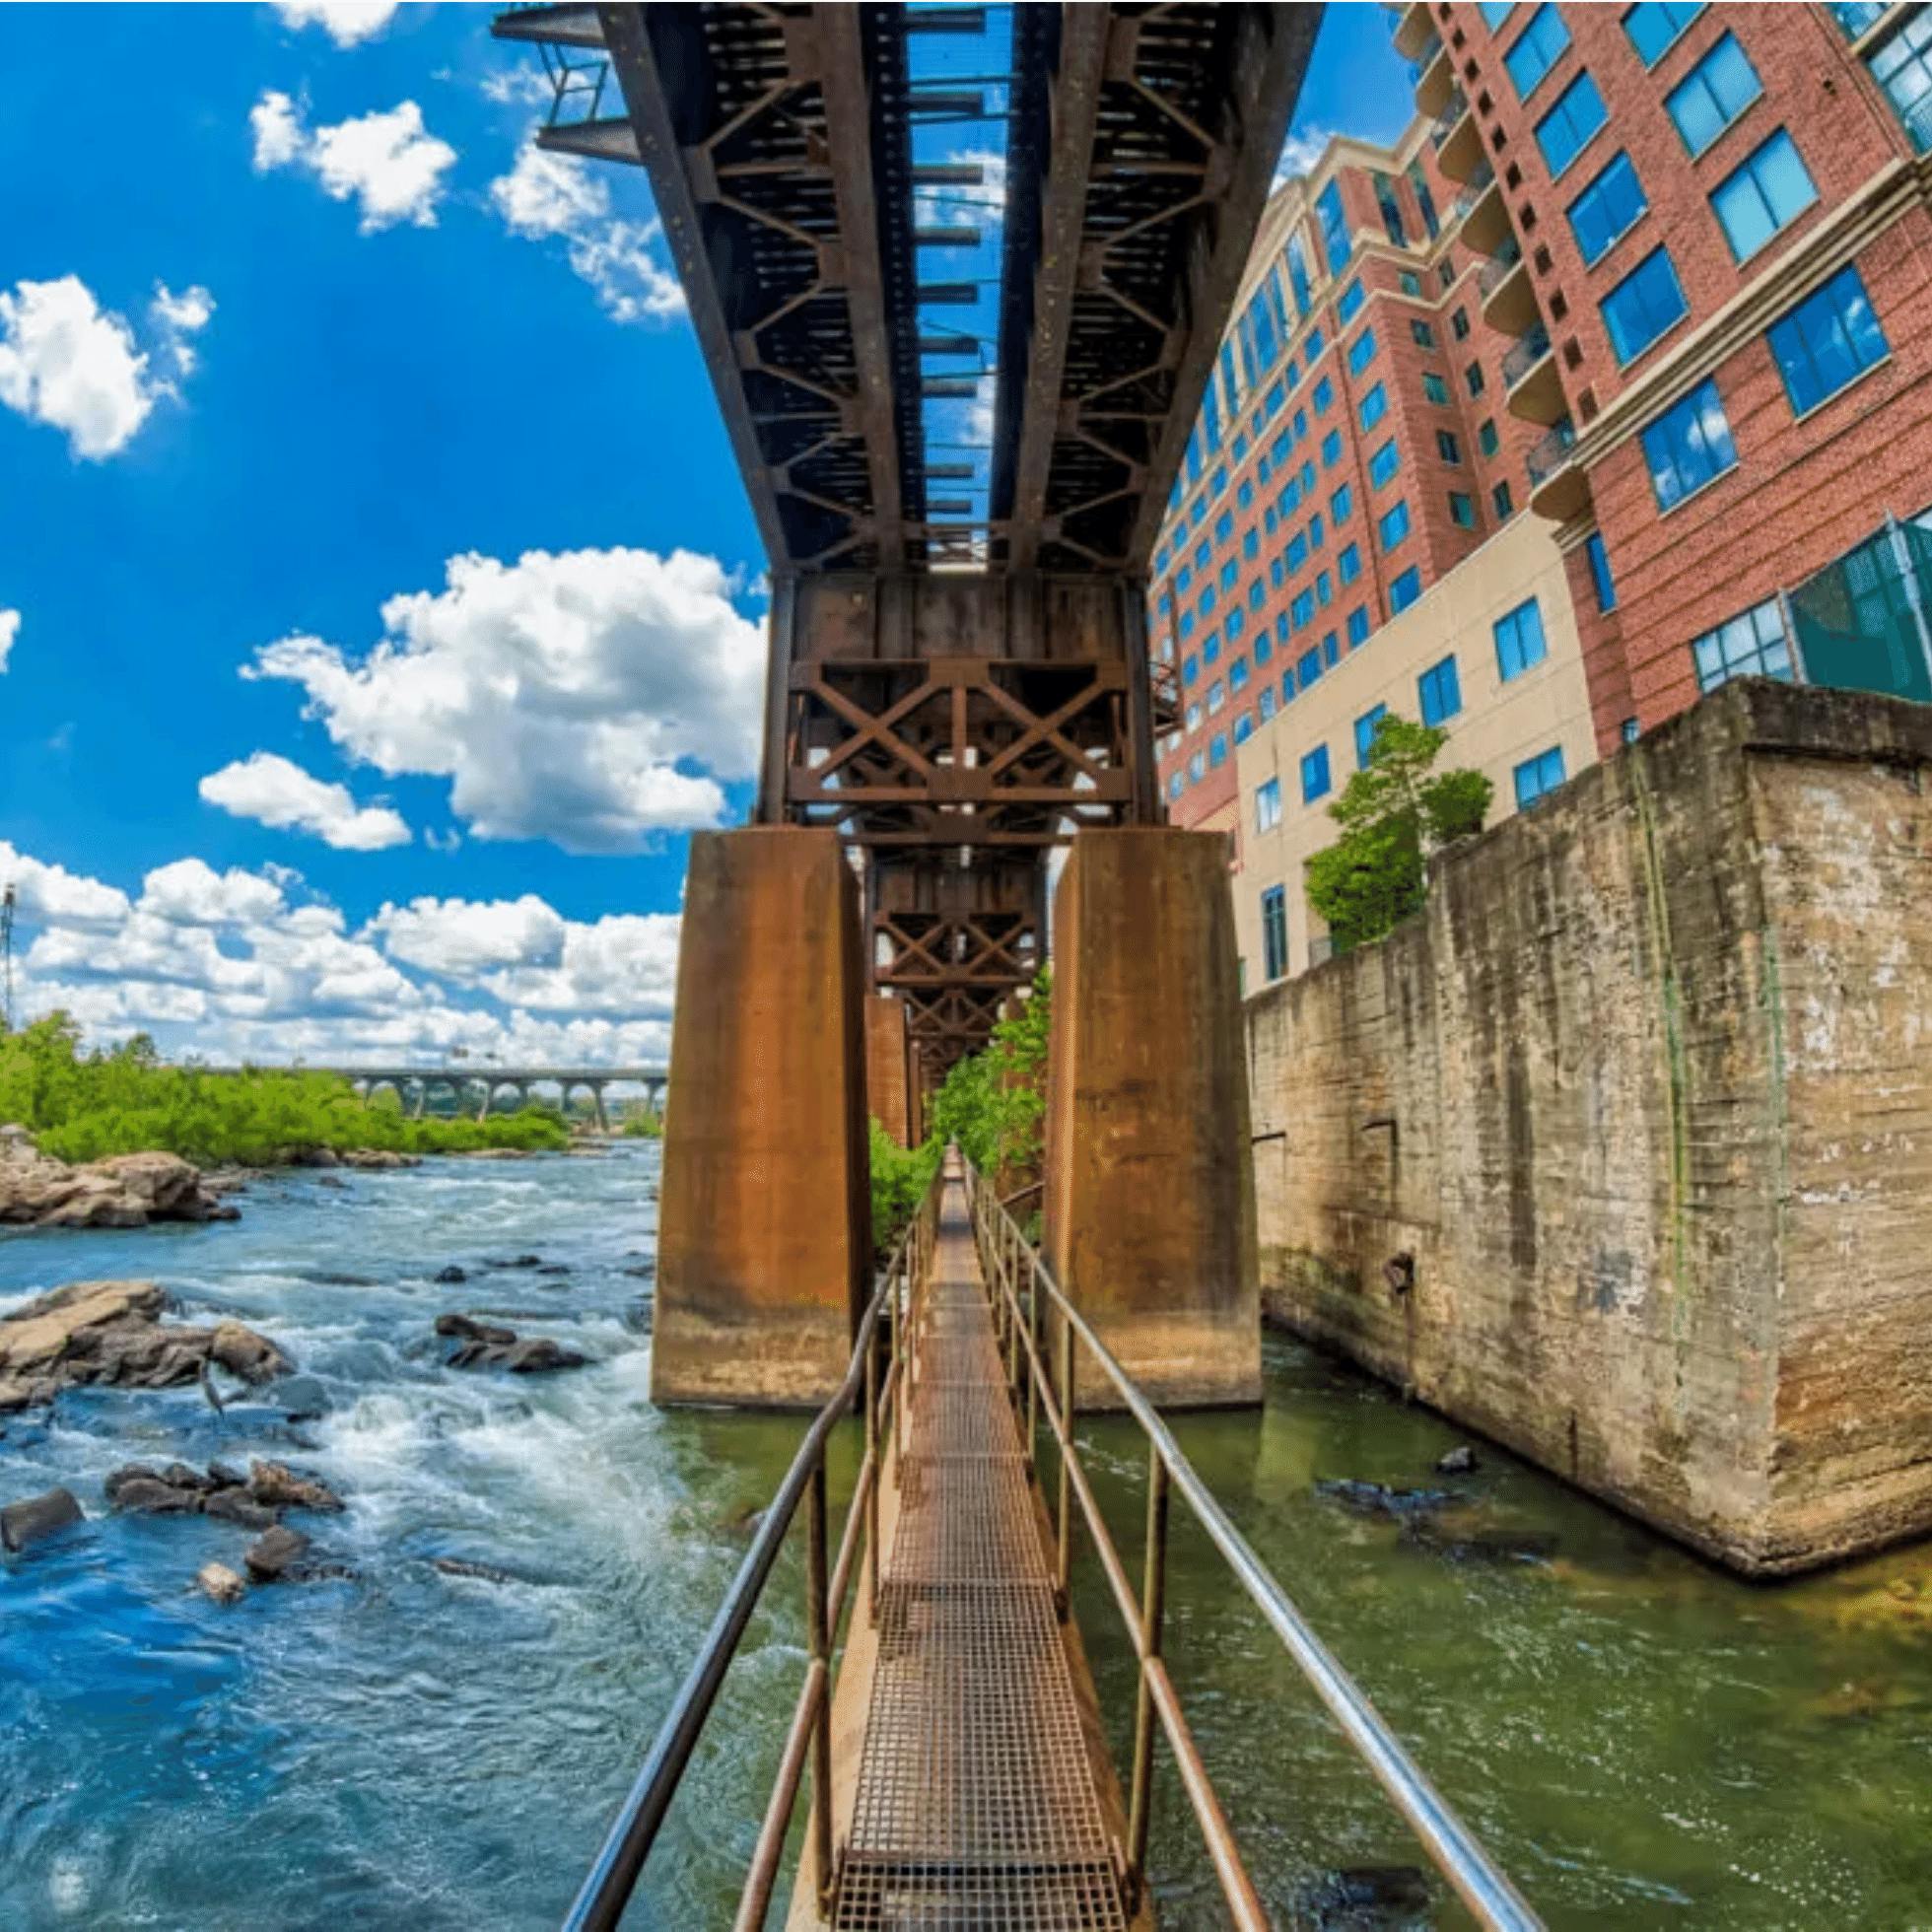 20+ Outdoor Attractions, Spaces and Parks to Explore in Downtown Richmond